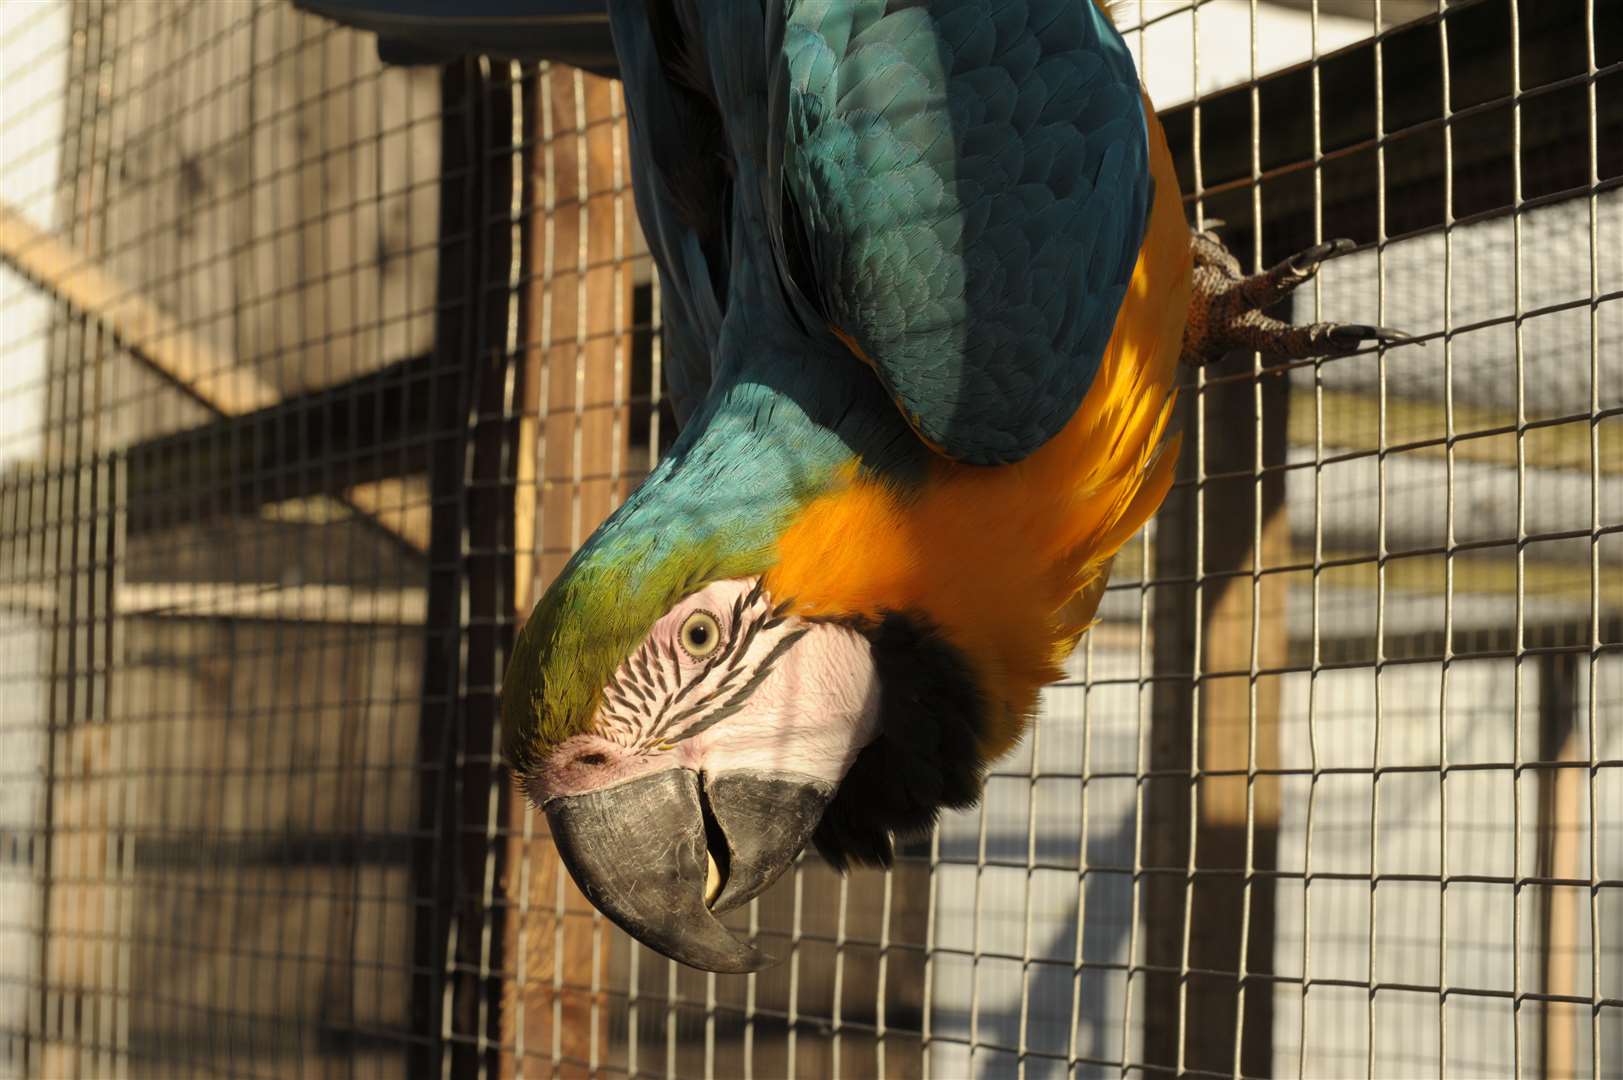 A blue and gold macaw